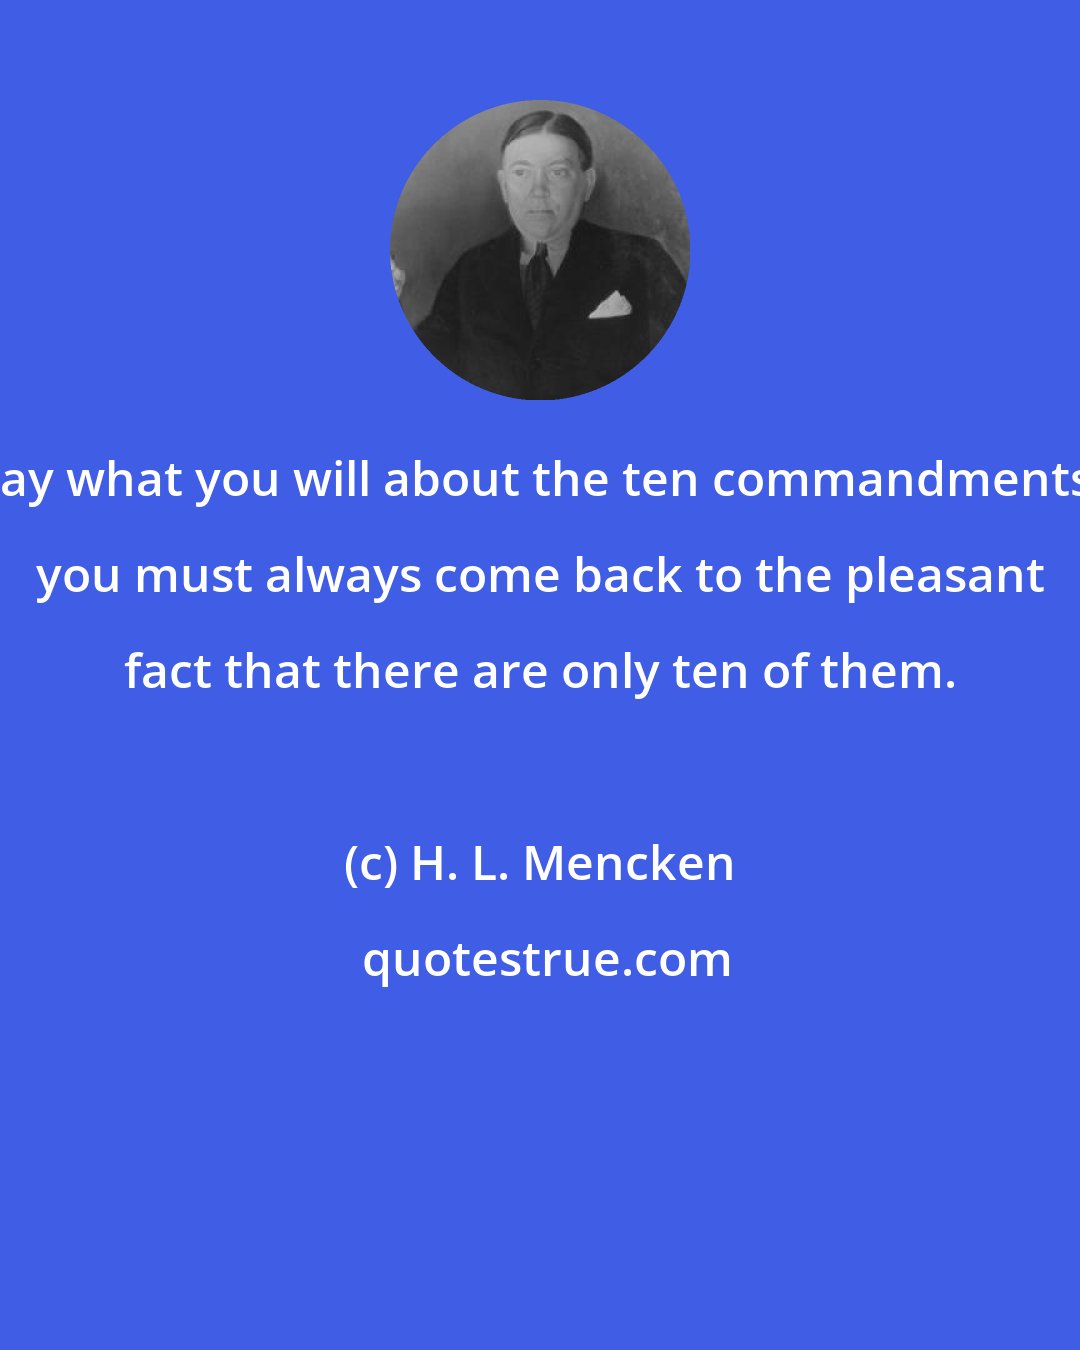 H. L. Mencken: Say what you will about the ten commandments, you must always come back to the pleasant fact that there are only ten of them.